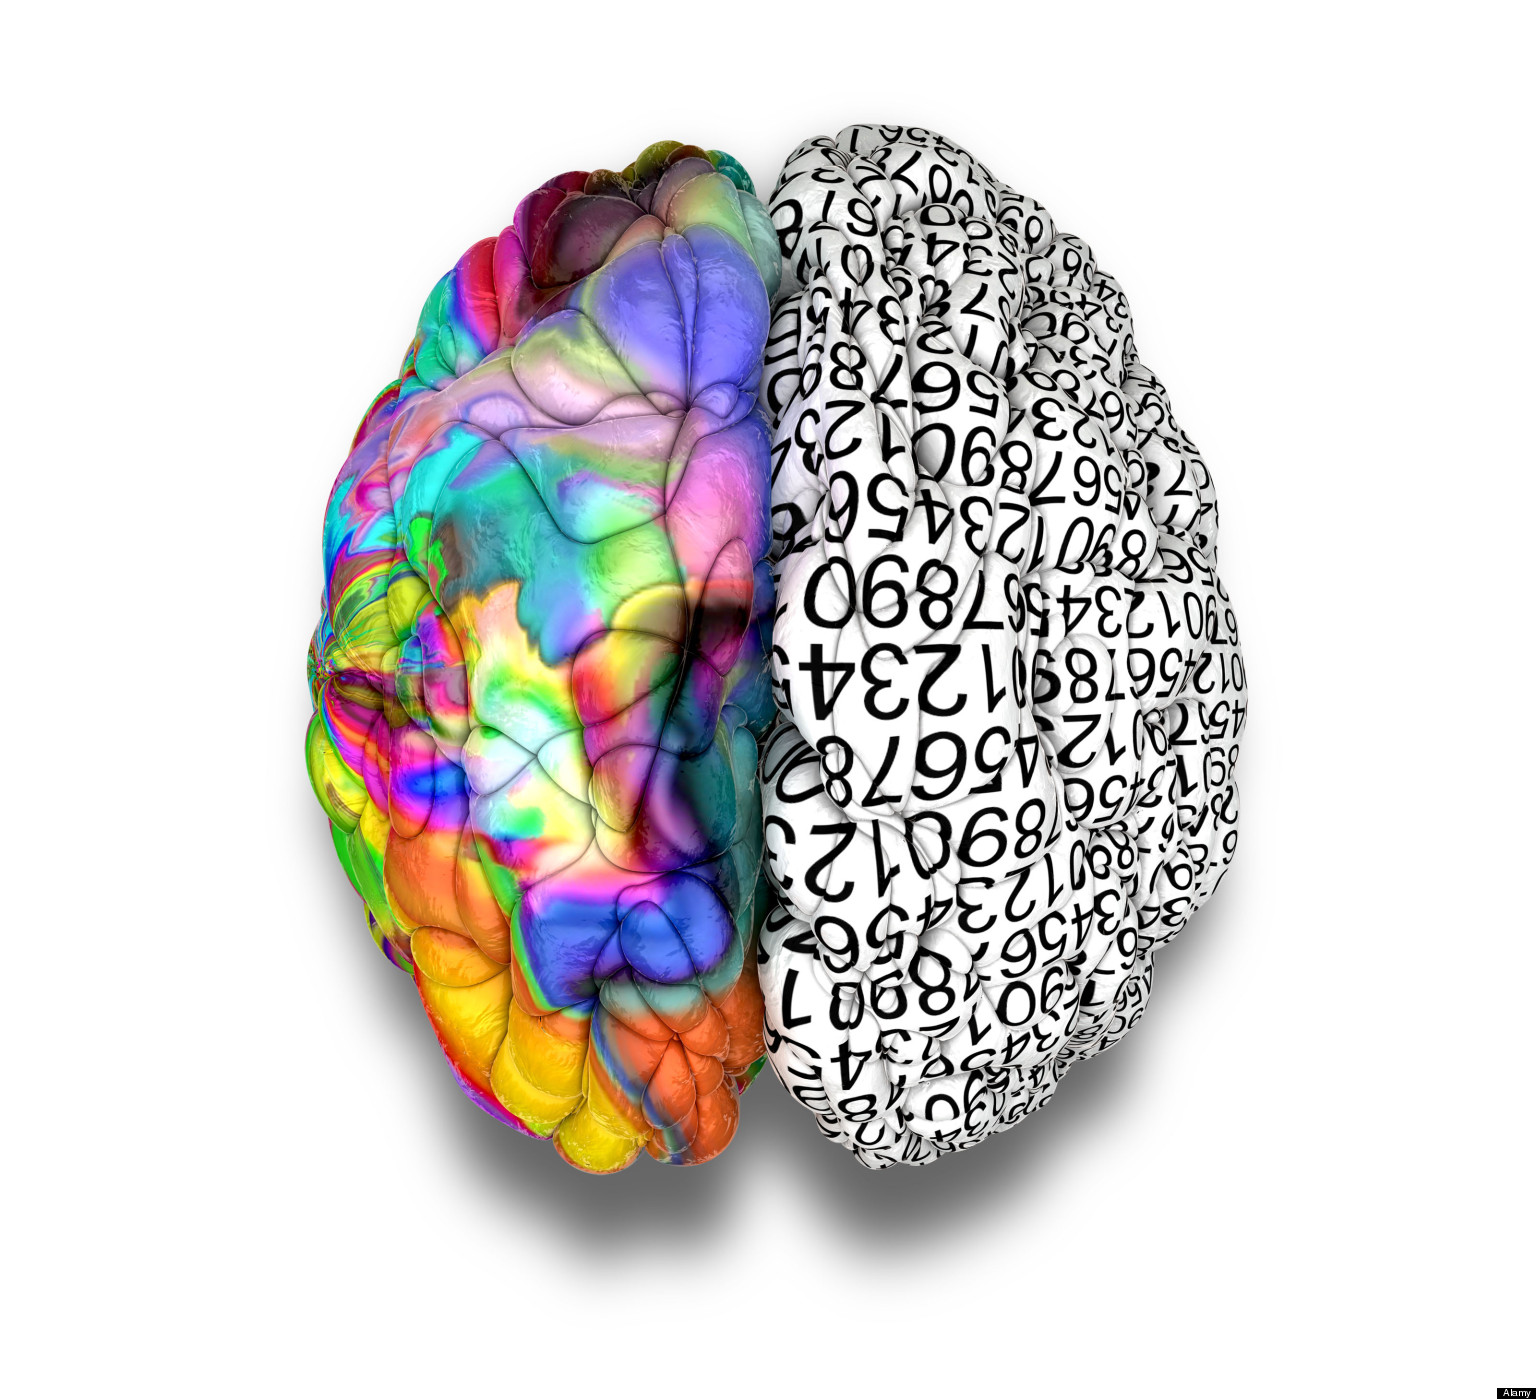 A typical brain with the left side depicting an analytical, structured and logical mind, and the right side depicting a scattere